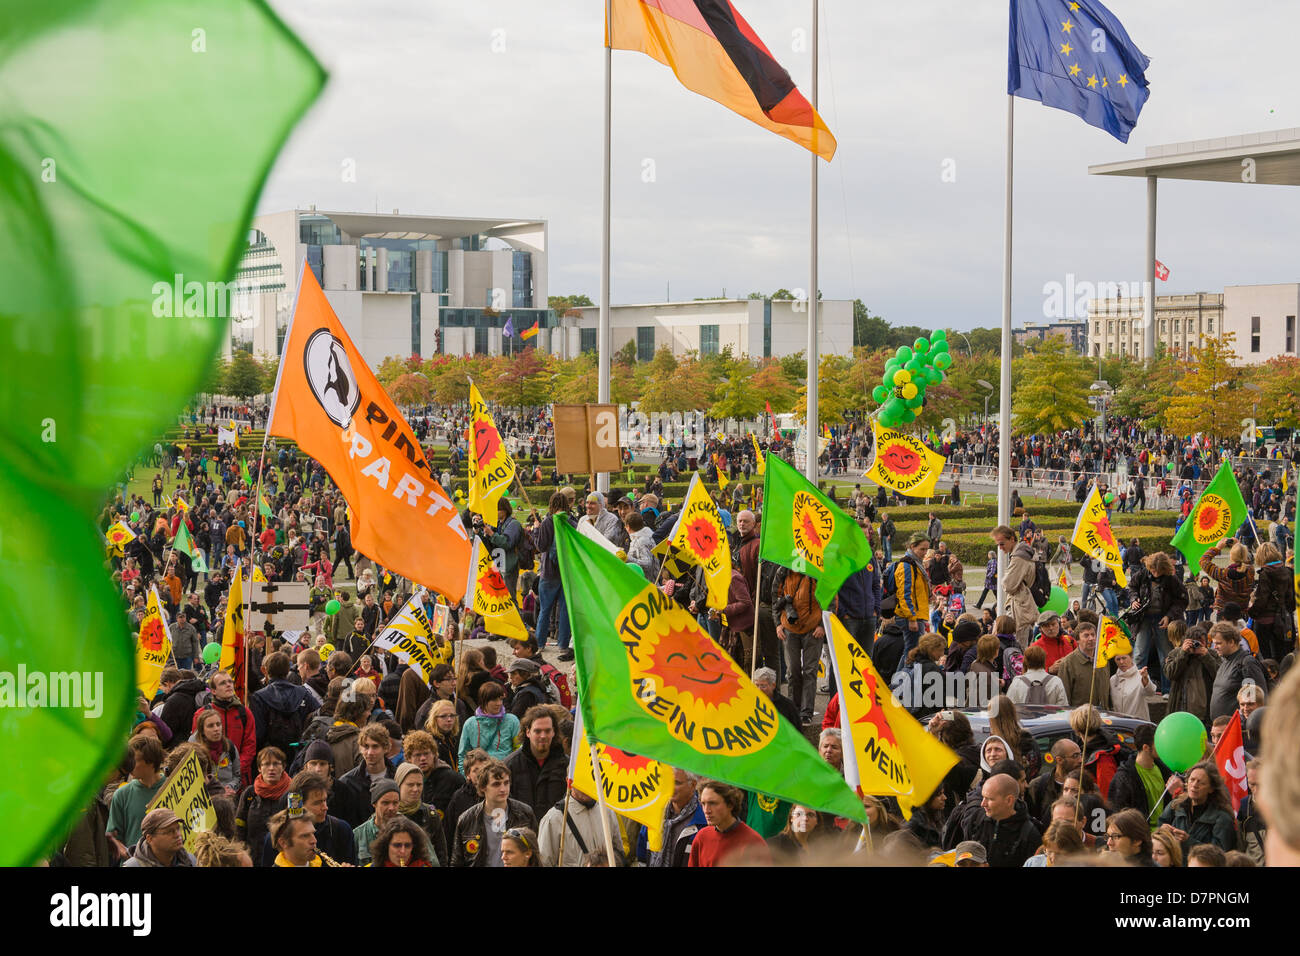 anti-nuclear demonstration in government district, here in front of Reichstag building or Bundestag the parliament, Berlin Stock Photo